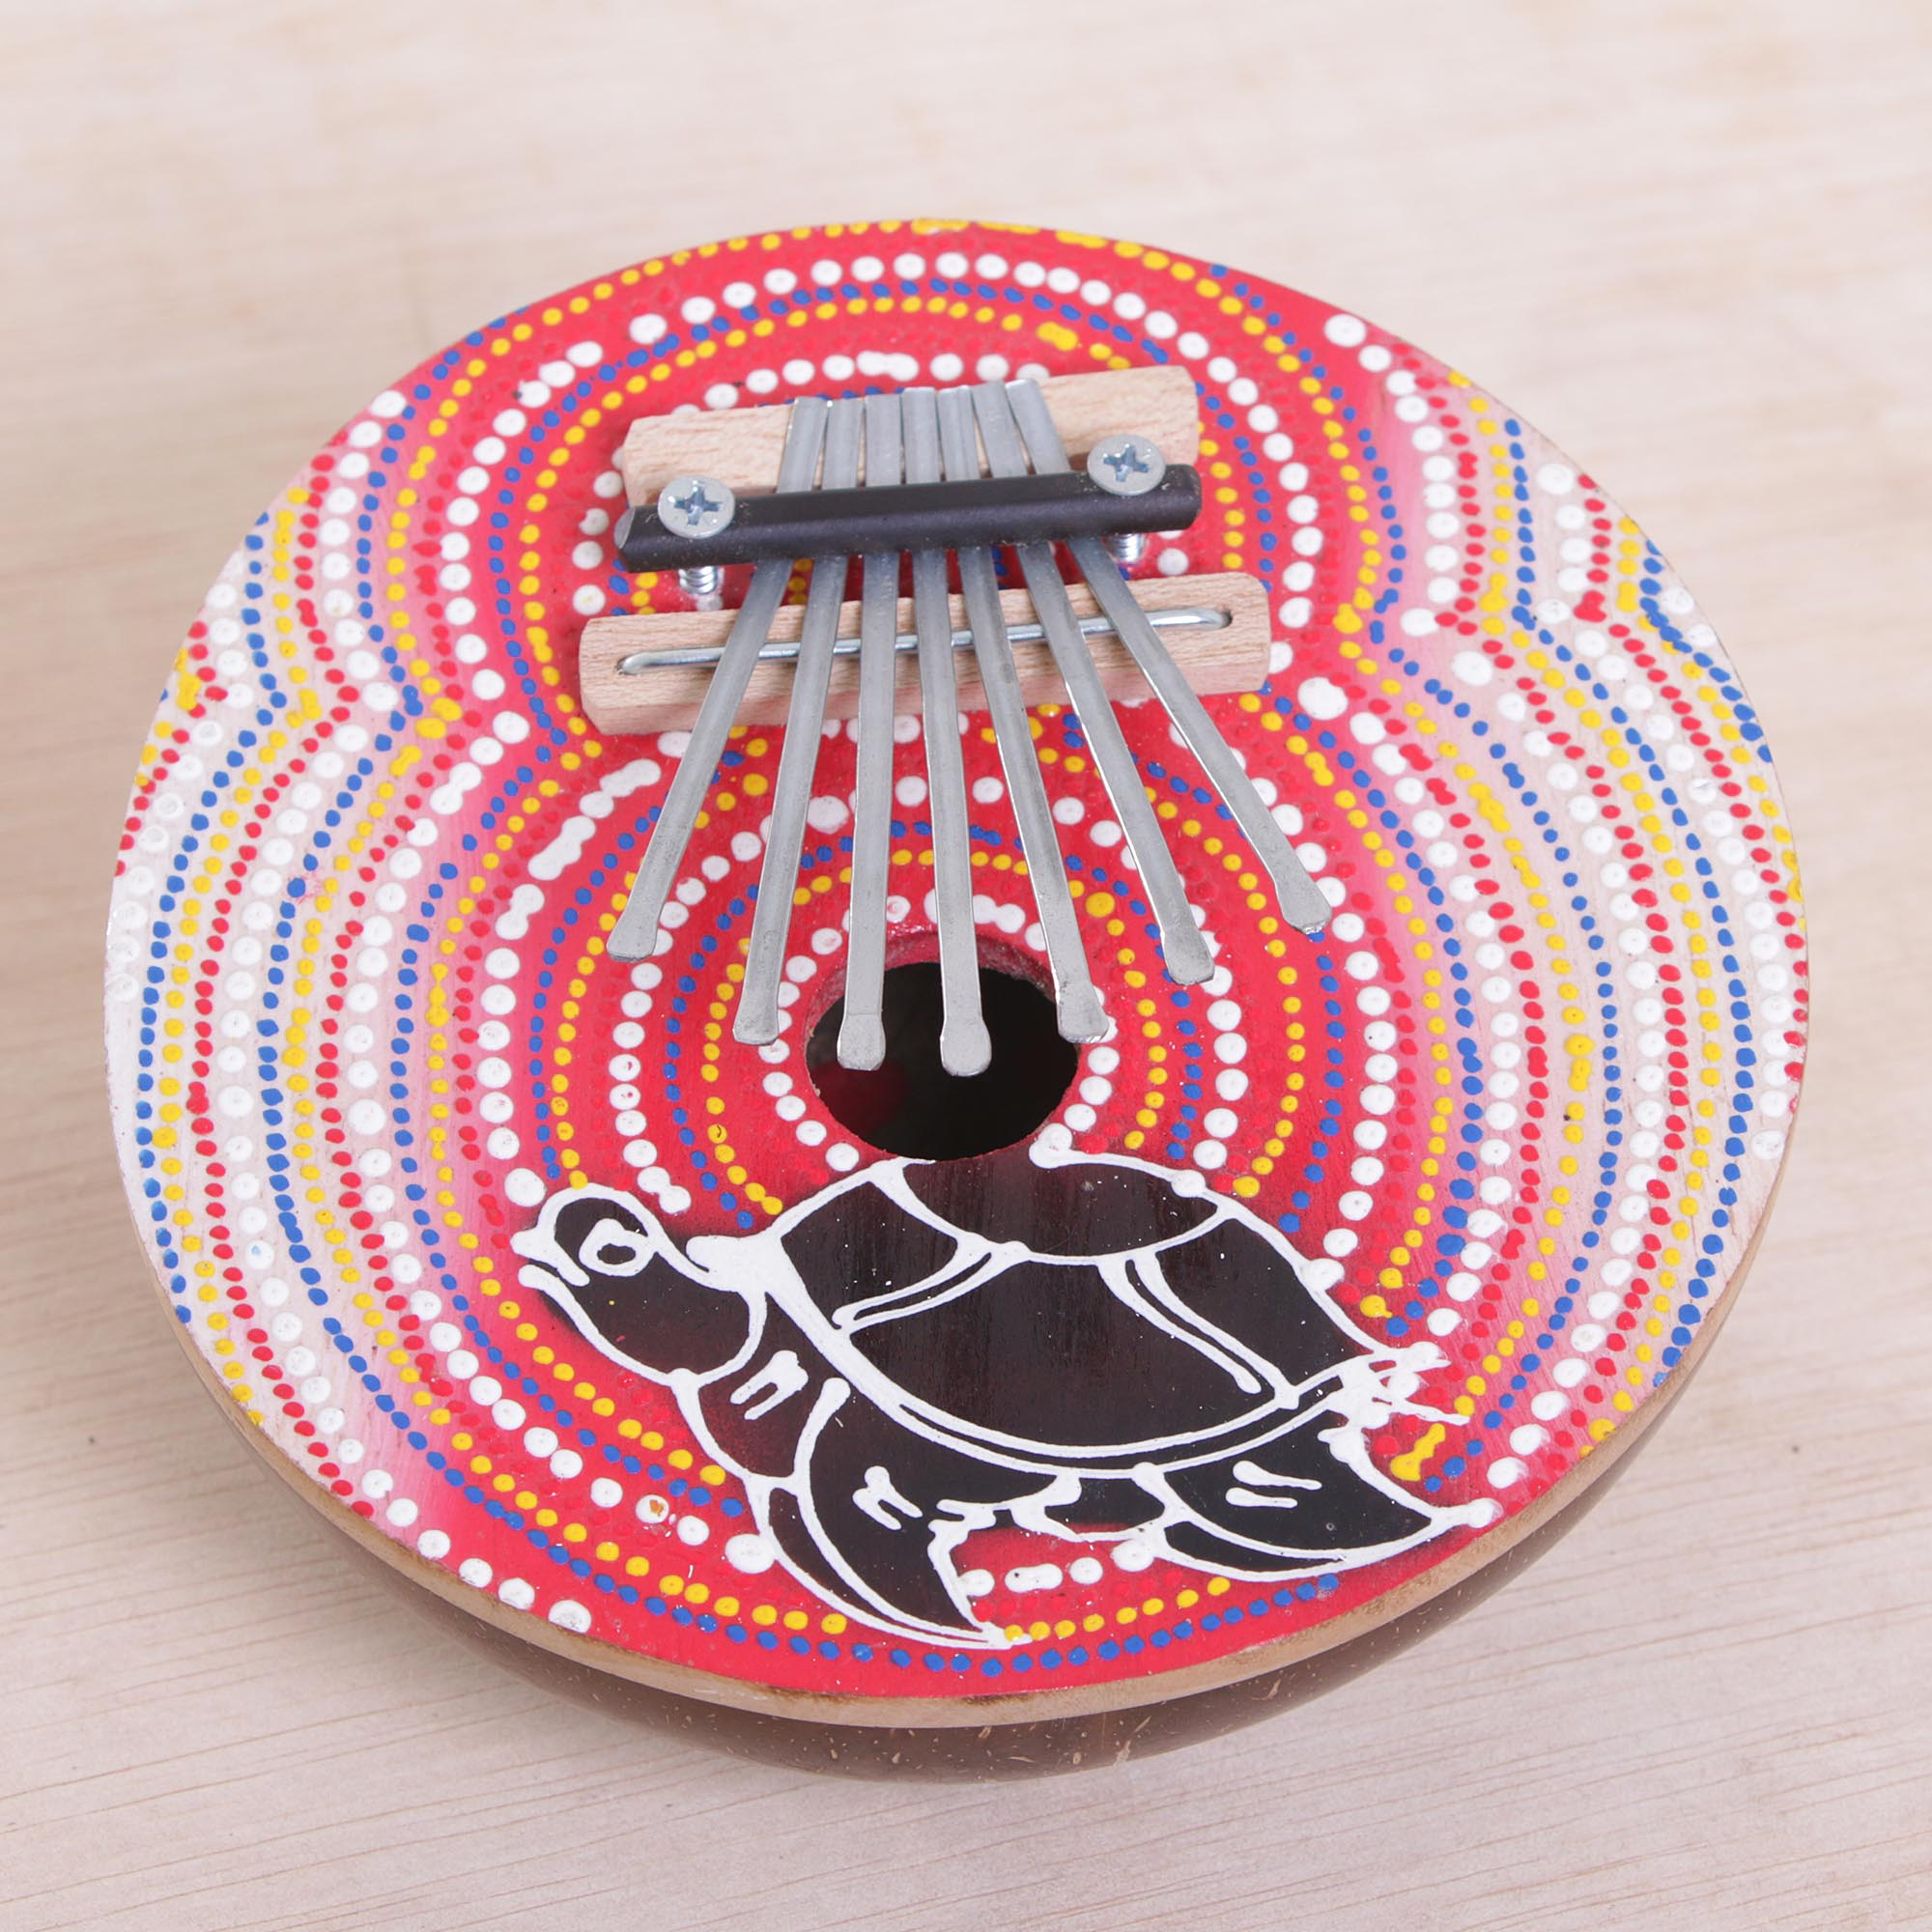 Hand Crafted Coconut and Wood 7 Key Sea Turtle Mbira Thumb Piano